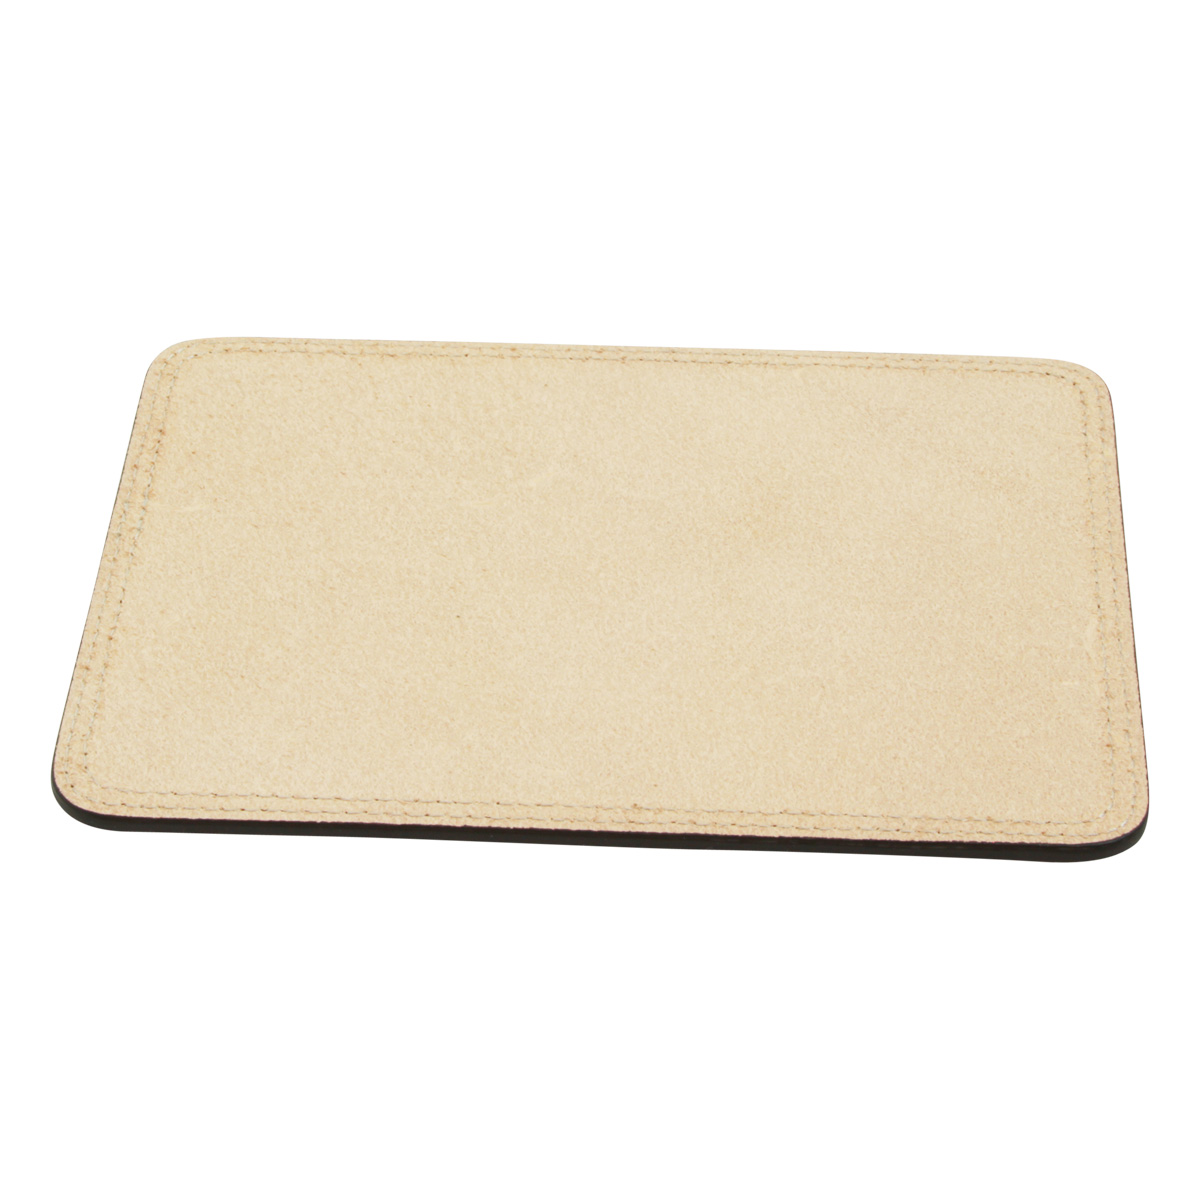 Leather mouse pad  | 761089CB UK | Old Angler Firenze